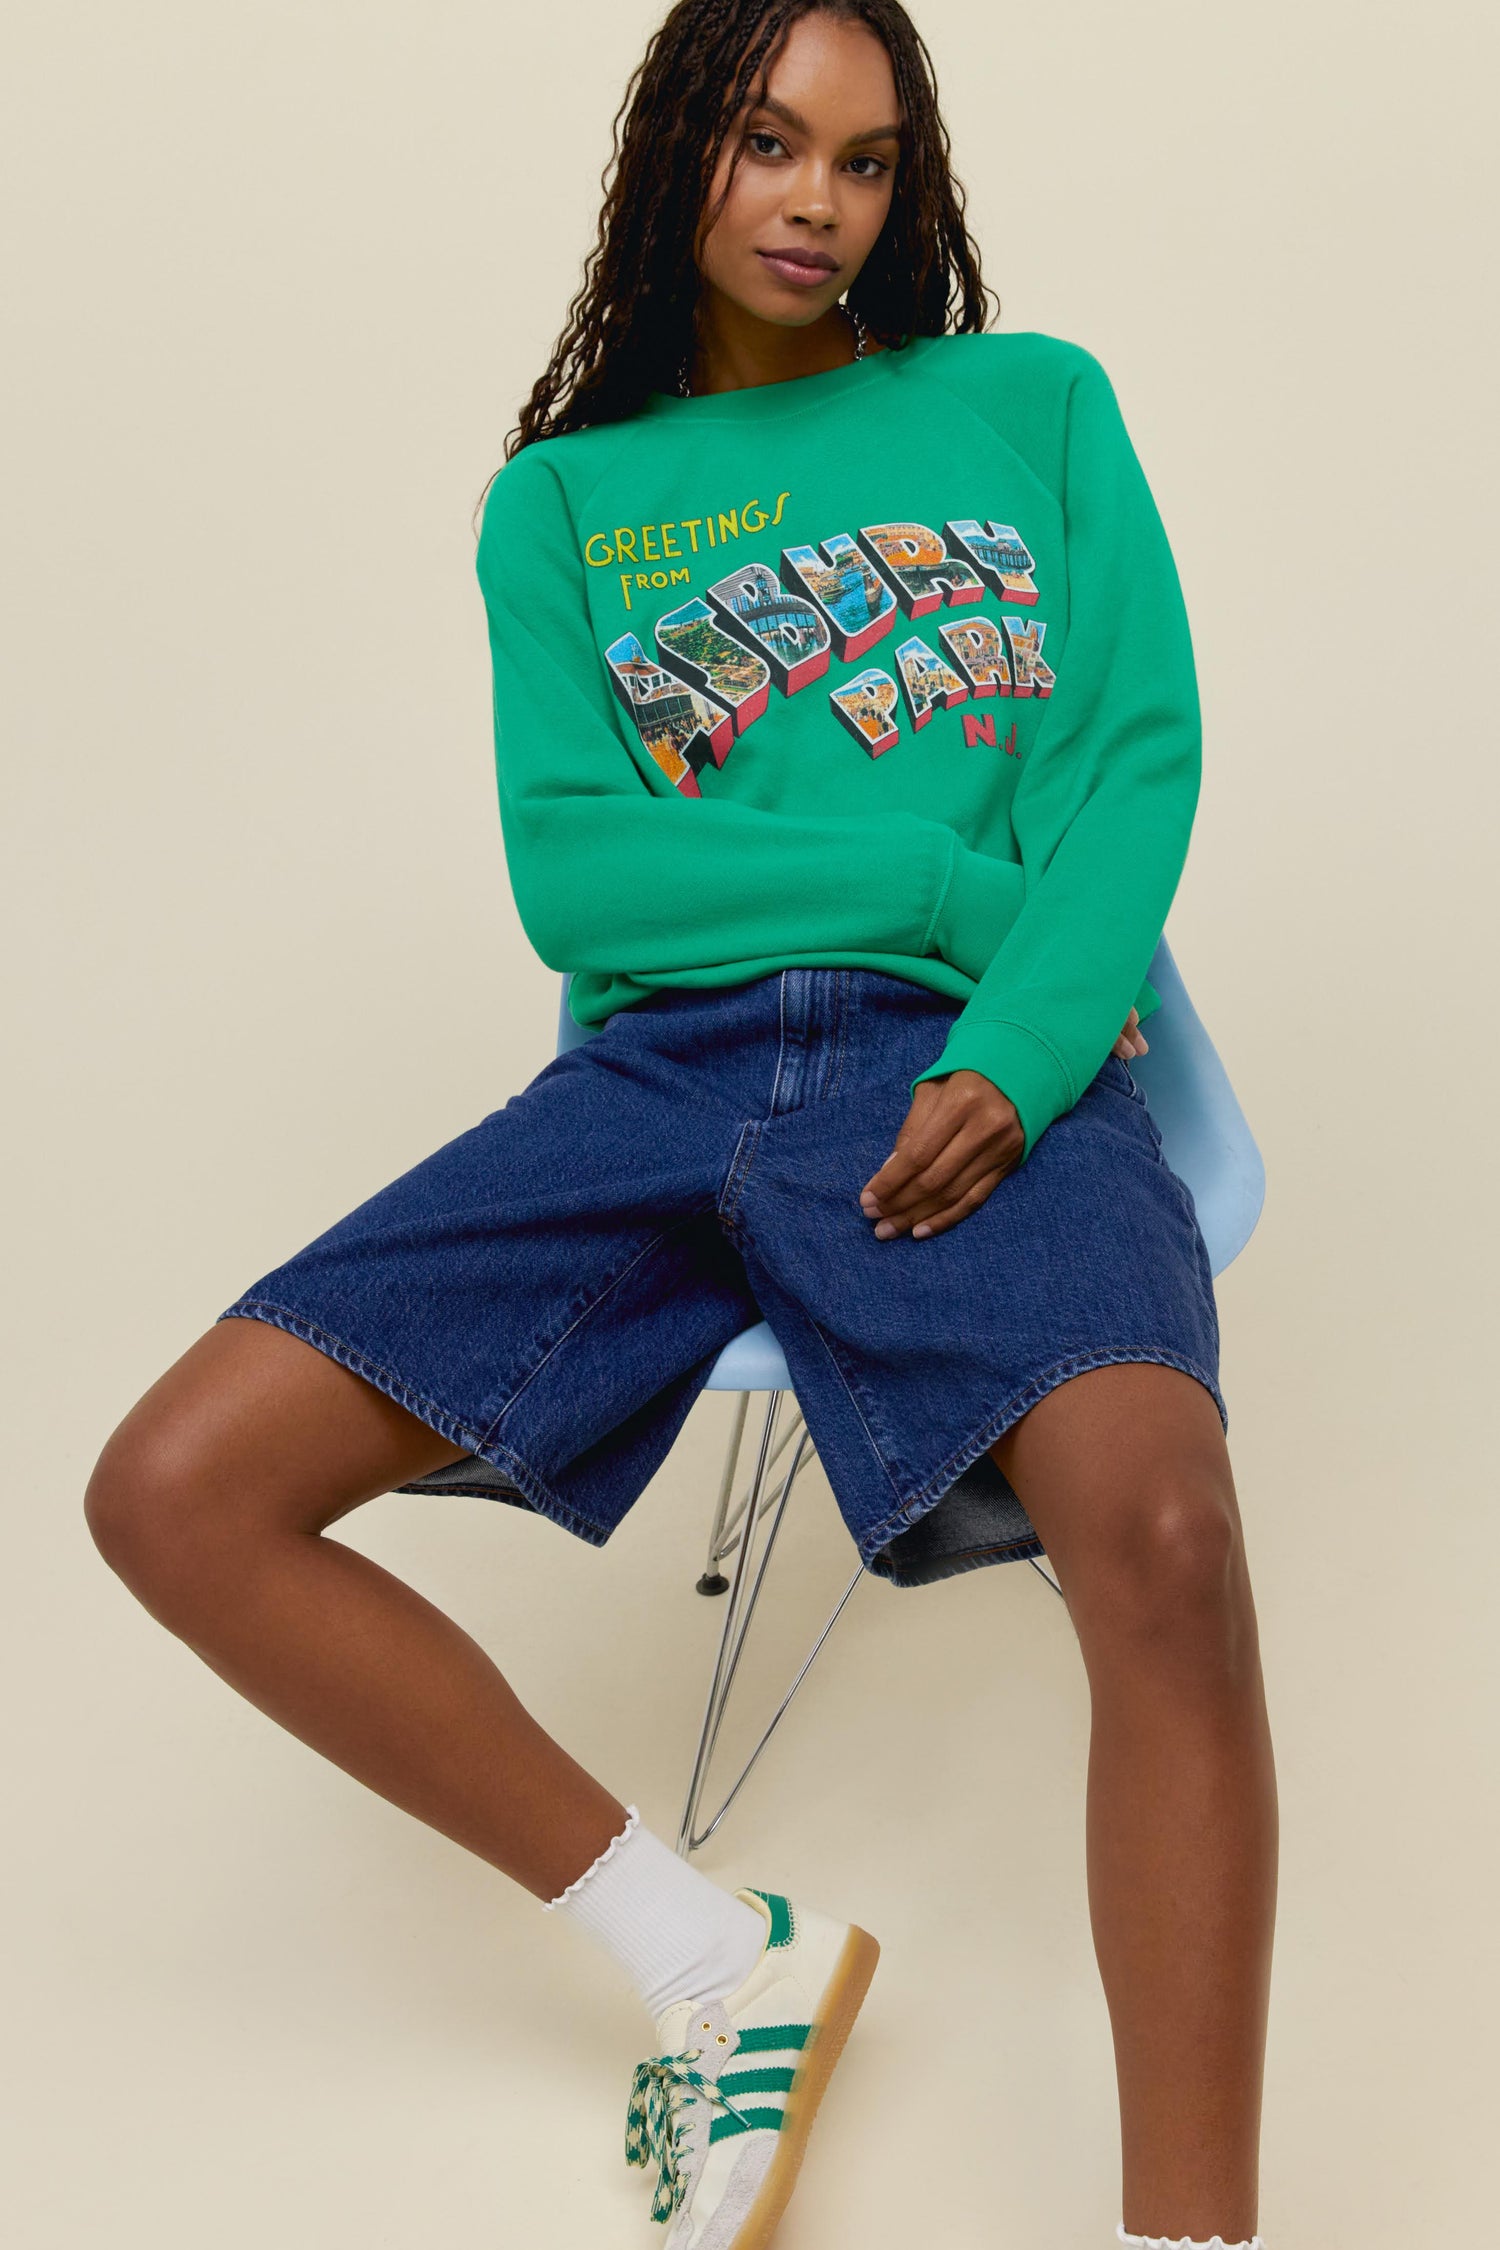 A model featuring a green long sleeve merch, stamped with "Asbury Park".